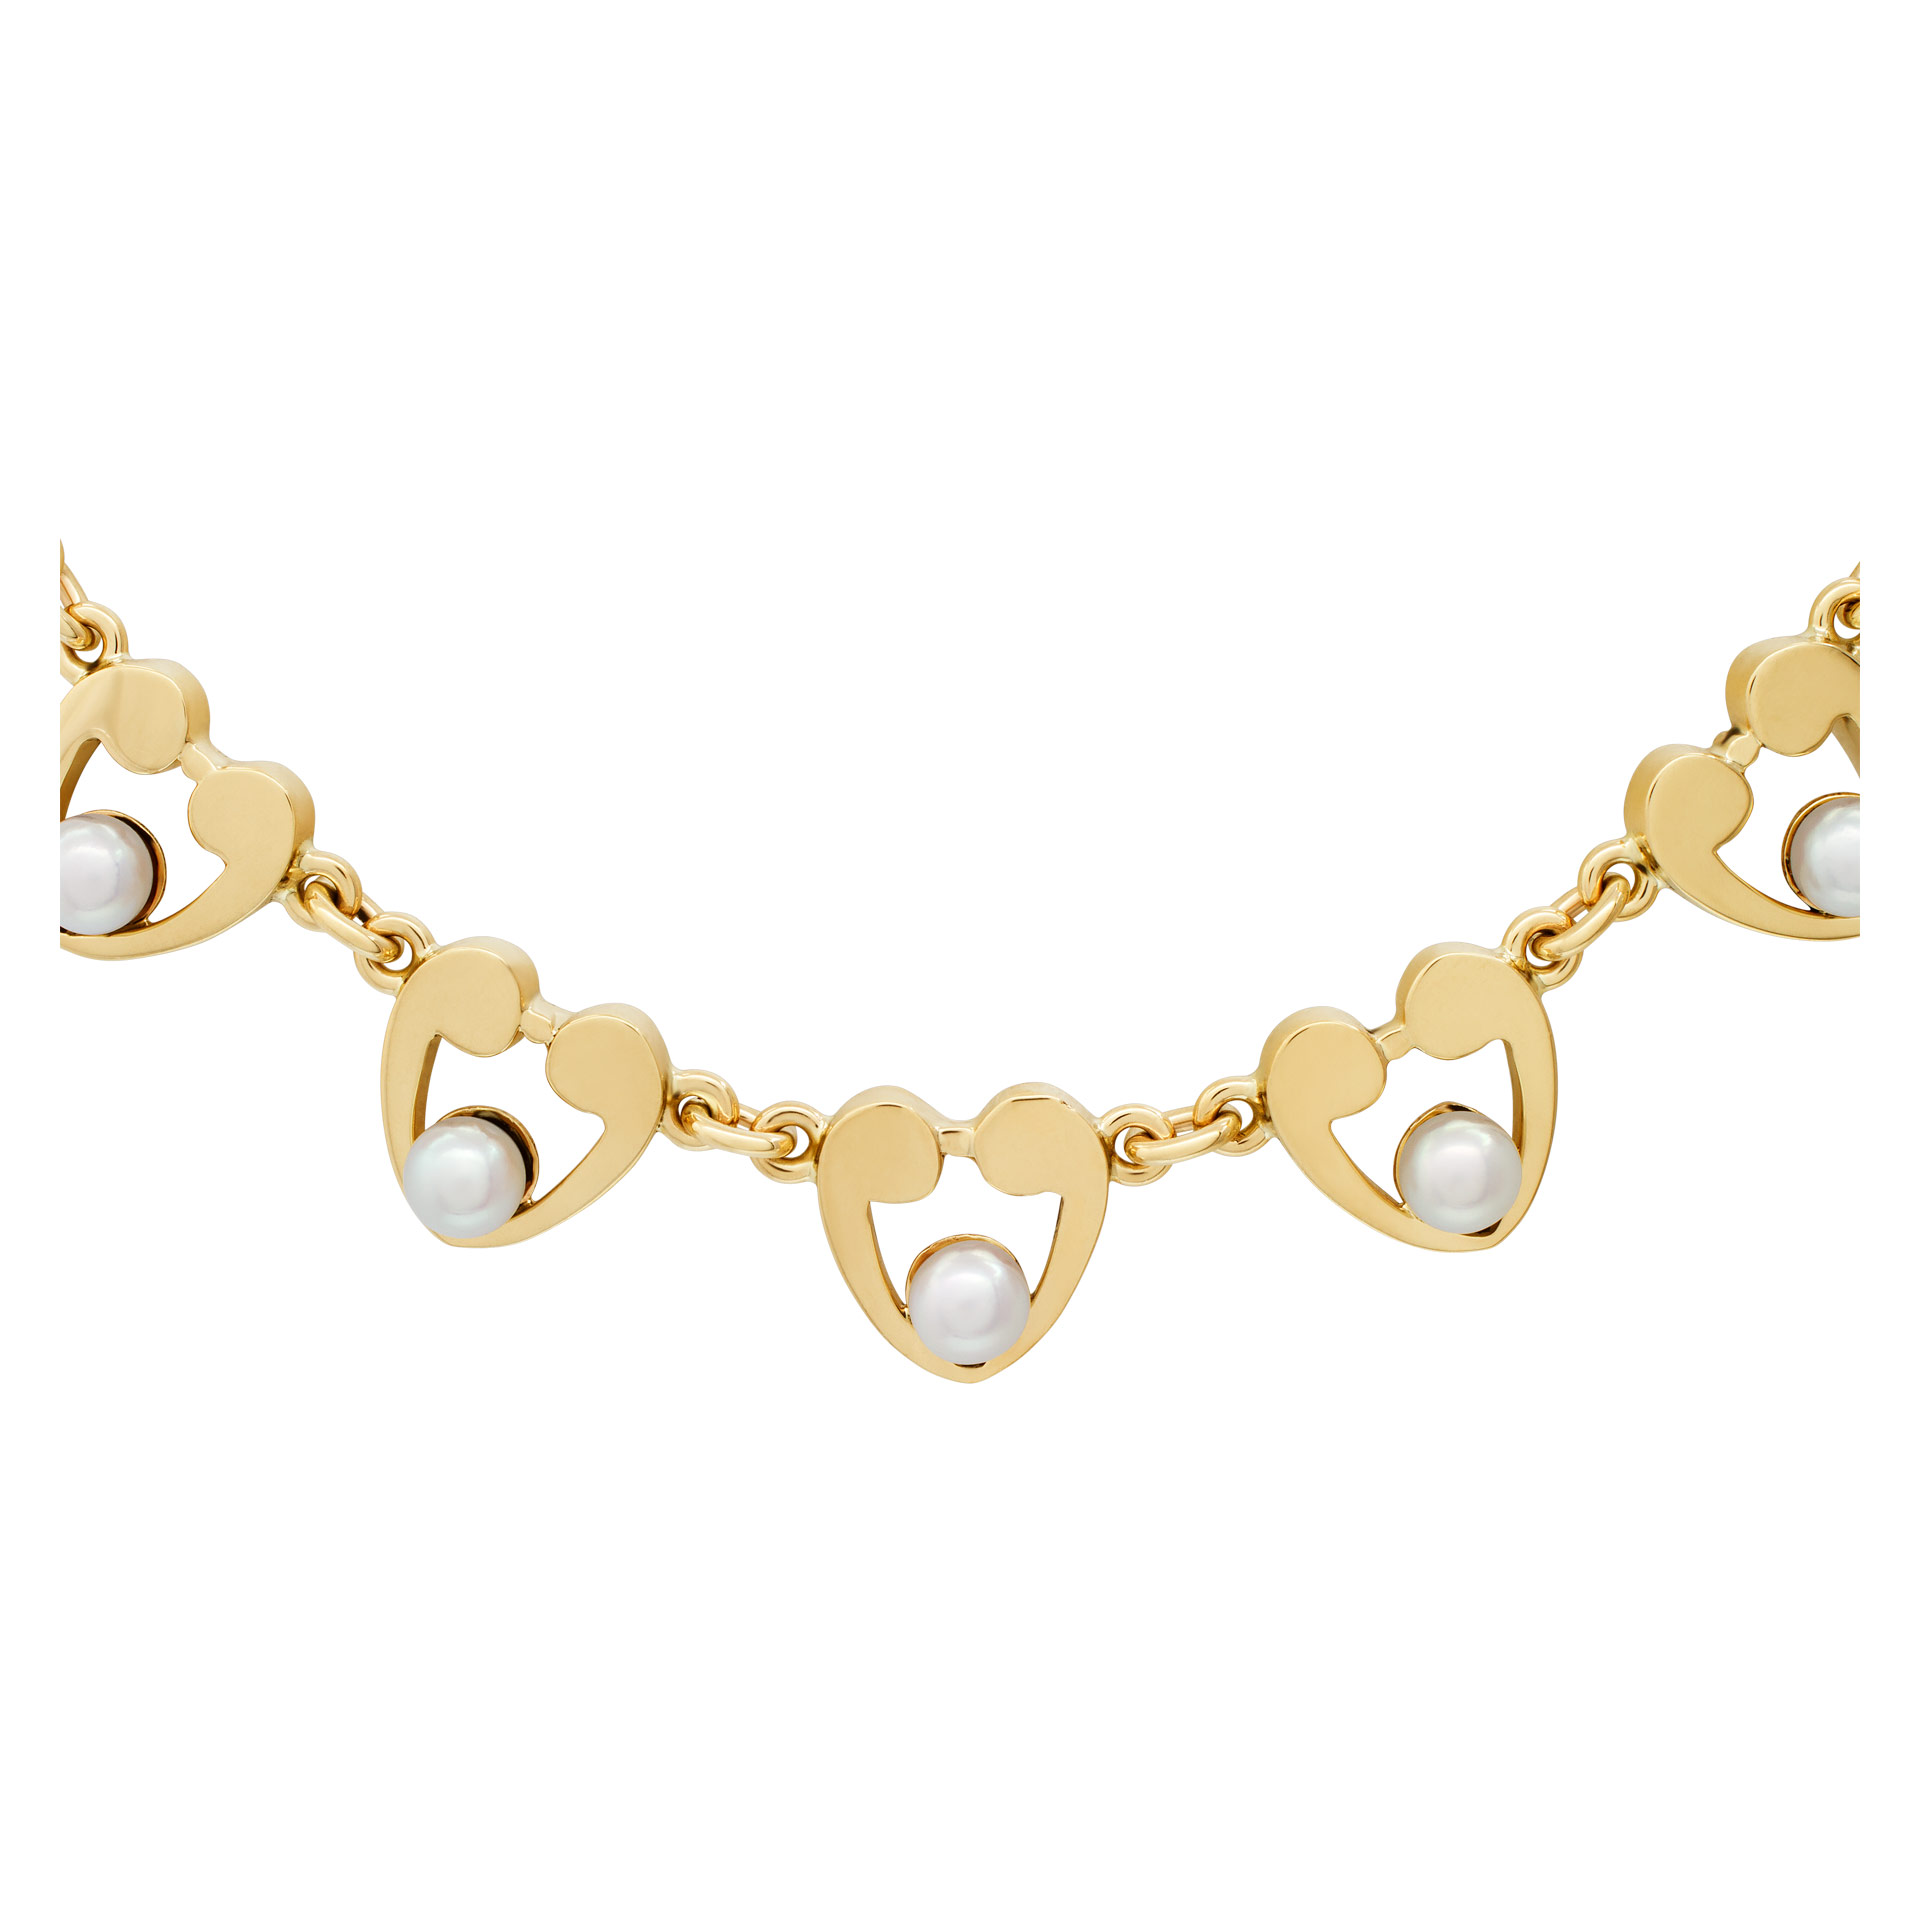 Cultured pearls (5x5.5mm) and sytlish heart design necklace in soild 14k yelllow gold. Choker necklace length: 15''. image 2